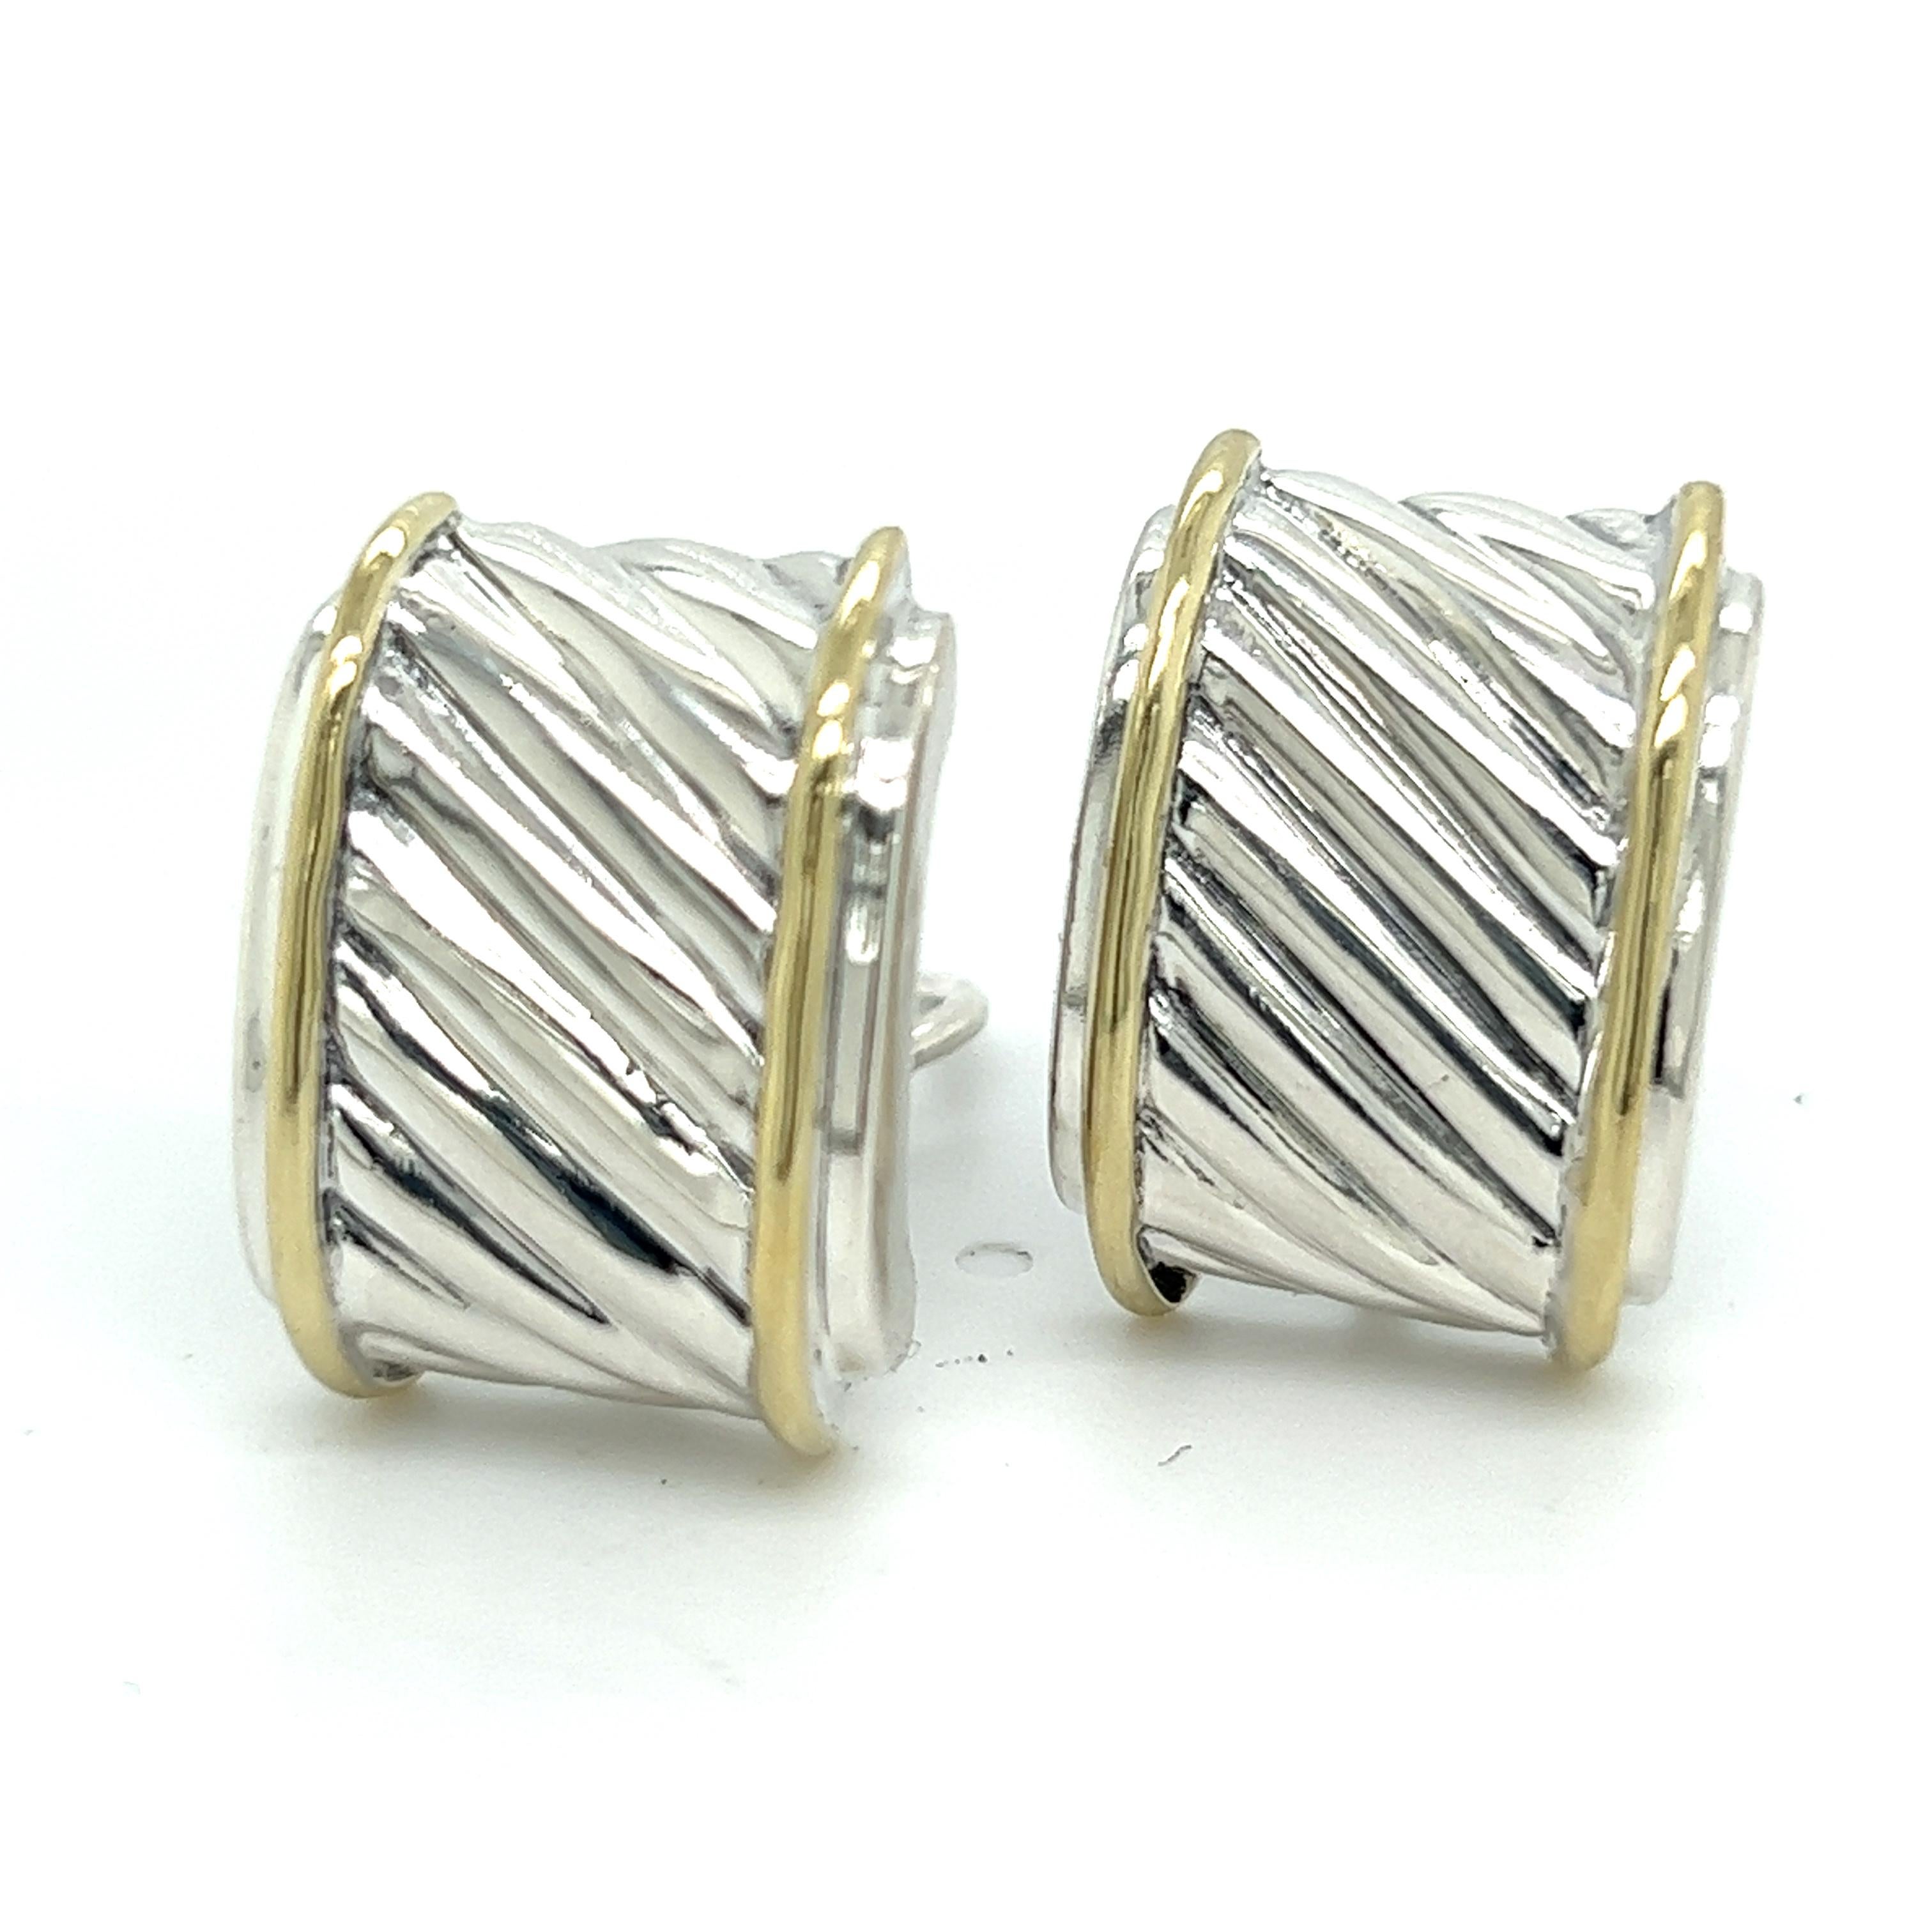 Authentic David Yurman  Estate Classic Cable Omega Back Earrings 14k & Silver DY212

RETAIL $799.00

These elegant Authentic David Yurman earrings have a weight of 12.7 Grams.

TRUSTED SELLER SINCE 2002
PLEASE SEE OUR HUNDREDS OF POSITIVE FEEDBACKS